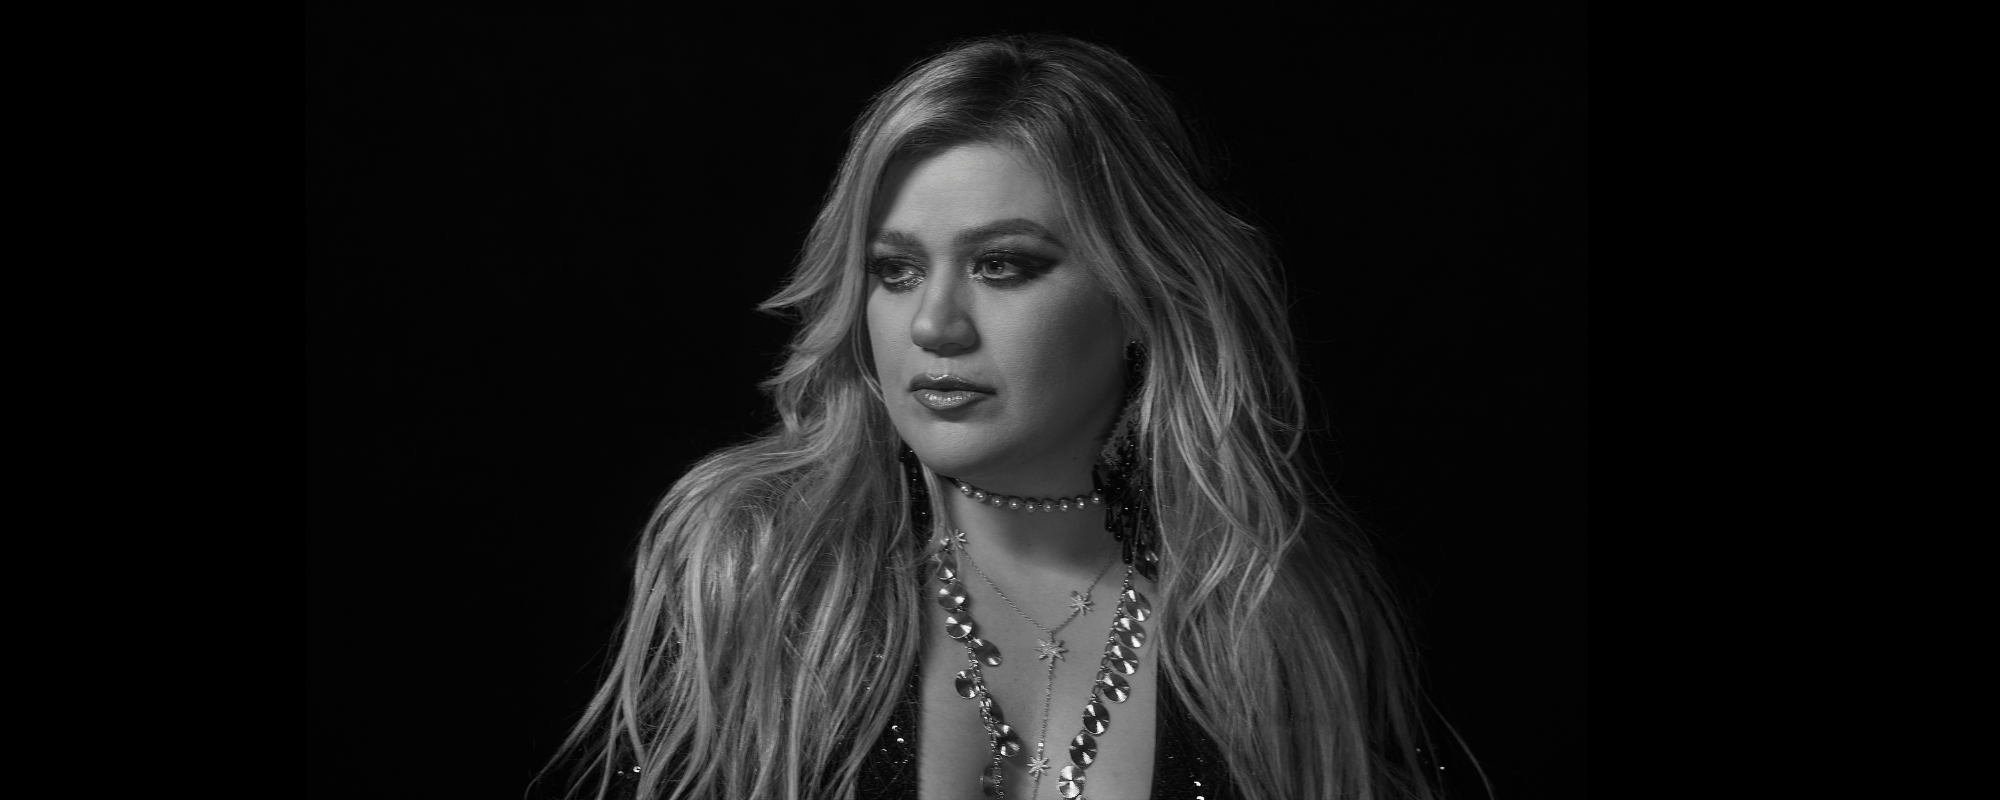 Kelly Clarkson Collaborates with Steve Martin on New Song “i hate love”